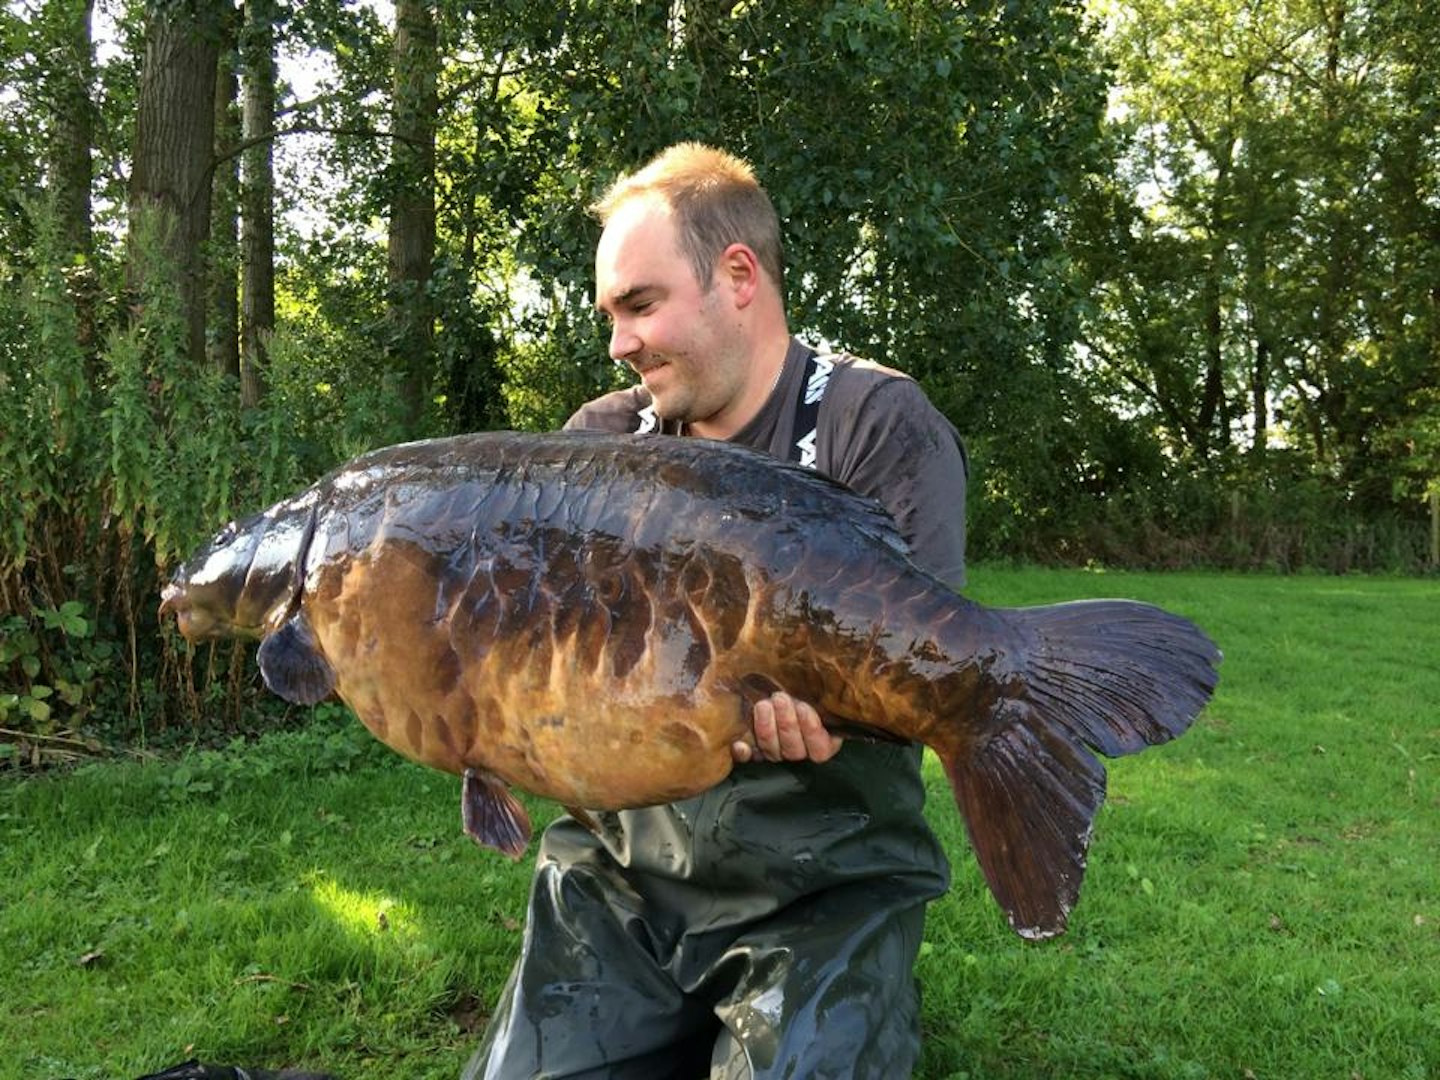 The imperious Big Plated at 47lb